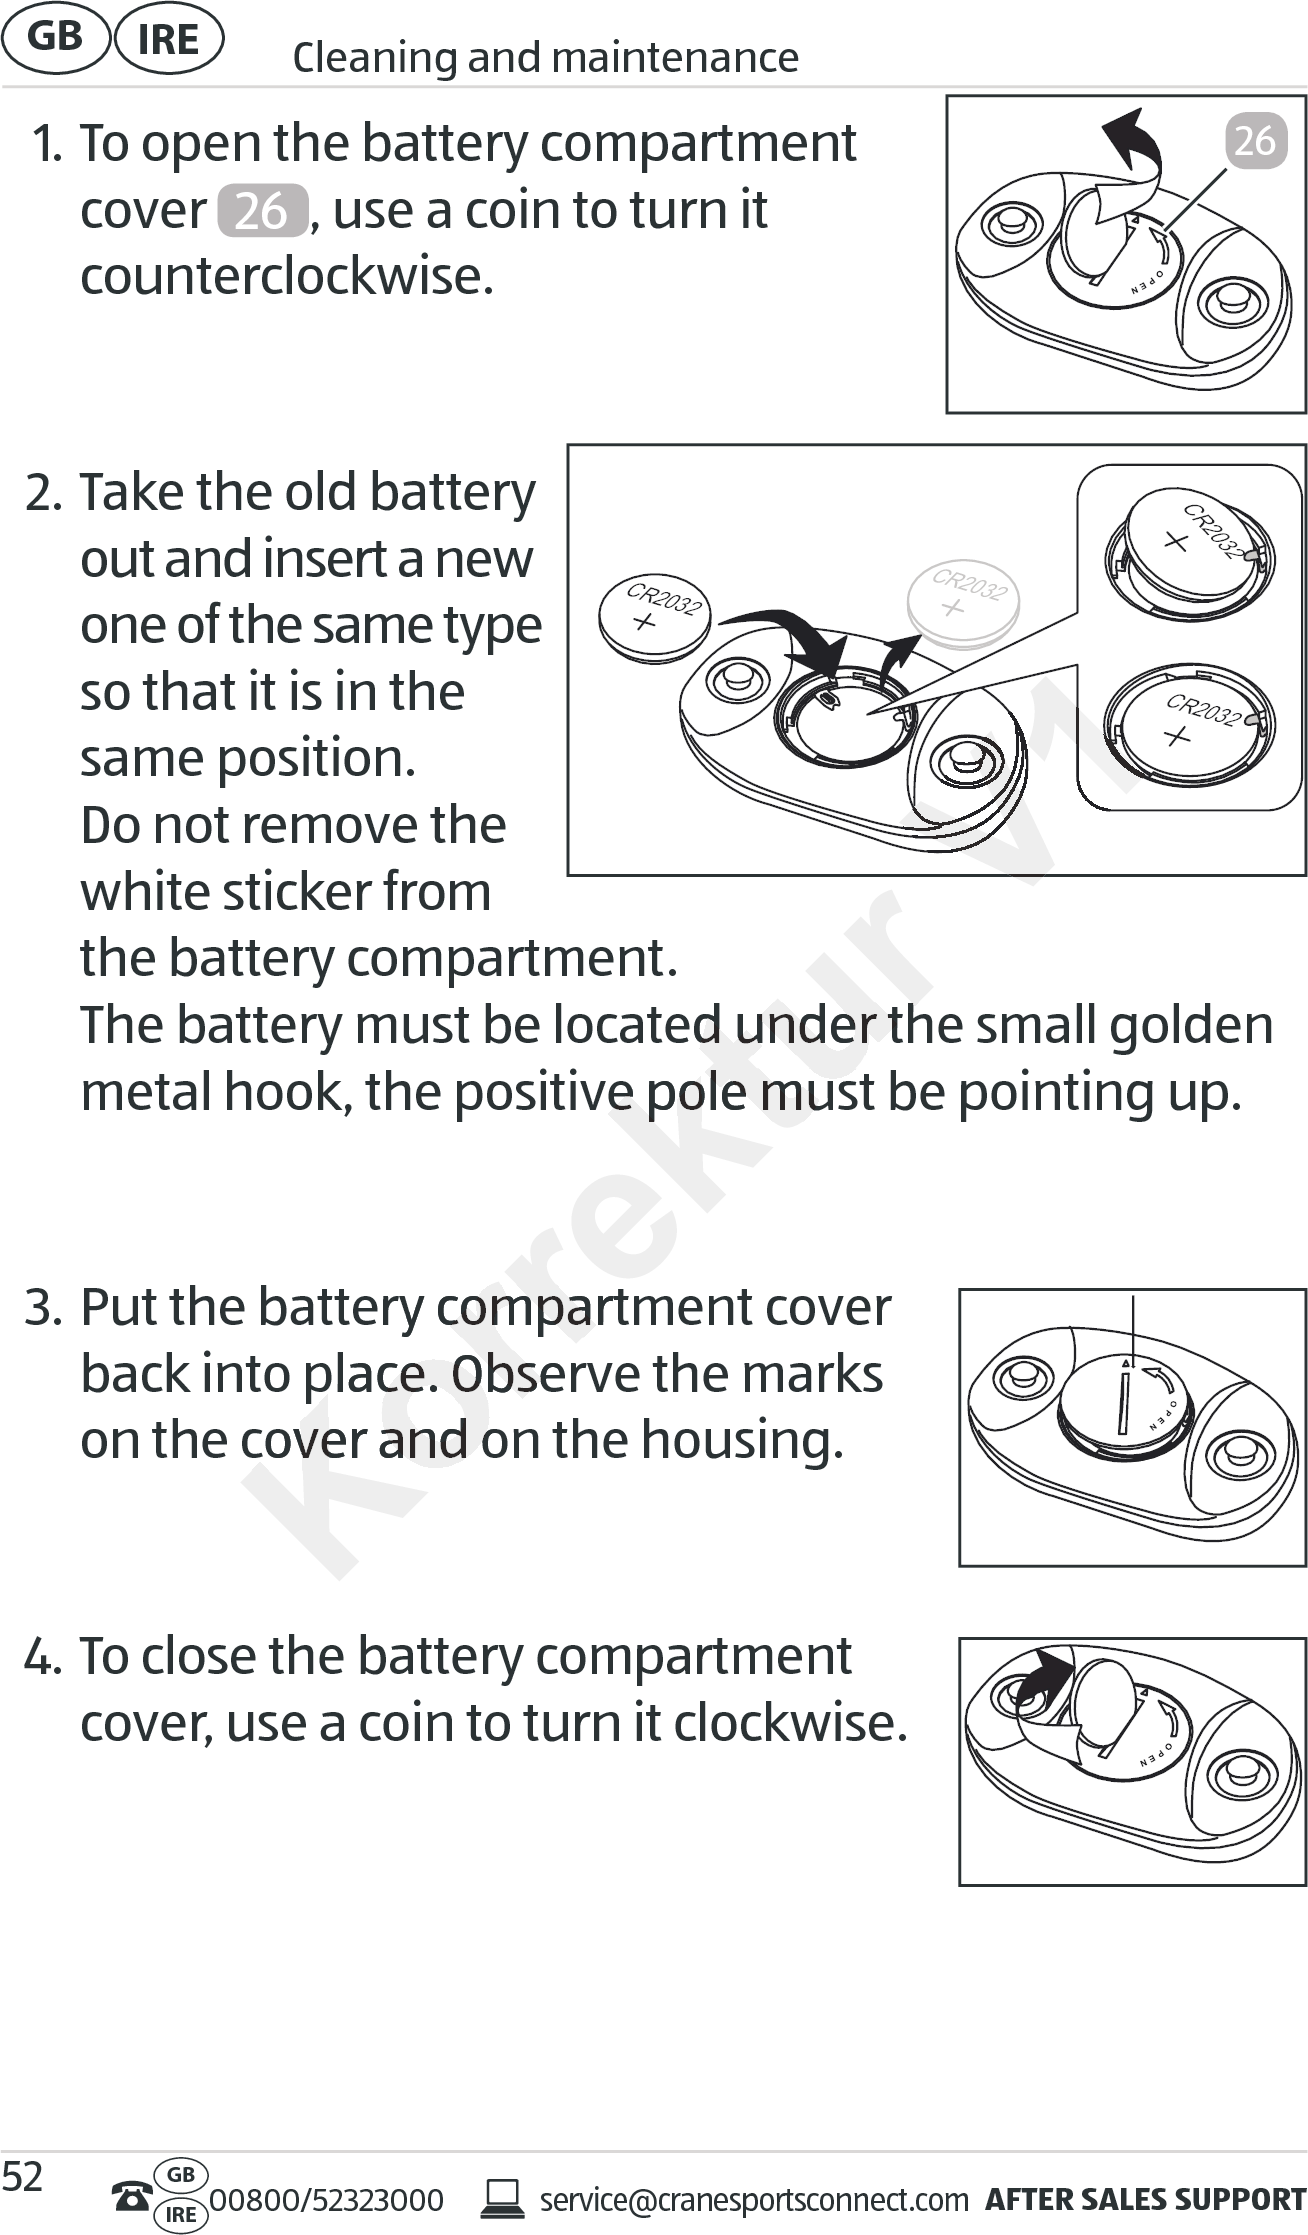 AFTER SALES SUPPORTservice@cranesportsconnect.comGBIRE 00800/52323000IRE Cleaning and maintenanceGB 521. To open the battery compartment  cover  26 , use a coin to turn it  counterclockwise.  2. Take the old battery  out and insert a new one of the same type so that it is in the same position. Do not remove the white sticker from the battery compartment. The battery must be located under the small golden metal hook, the positive pole must be pointing up.  3. Put the battery compartment cover  back into place. Observe the marks  on the cover and on the housing.  4. To close the battery compartment  cover, use a coin to turn it clockwise. 26CR2032CR2032CR2032CR2032Korrektur The battery must be located under the small golden The battery must be located under the small golden metal hook, the positive pole must be pointing up.metal hook, the positive pole must be pointing up.Put the battery compartment coverPut the battery compartment coverback into place. Observe the marks back into place. Observe the marks on the cover and on the housing.on the cover and on the housing.Korrektur Korrektur V1V1V1V1V1V1V1V1V1V1V1V1V1V1V1V1V1V1V1